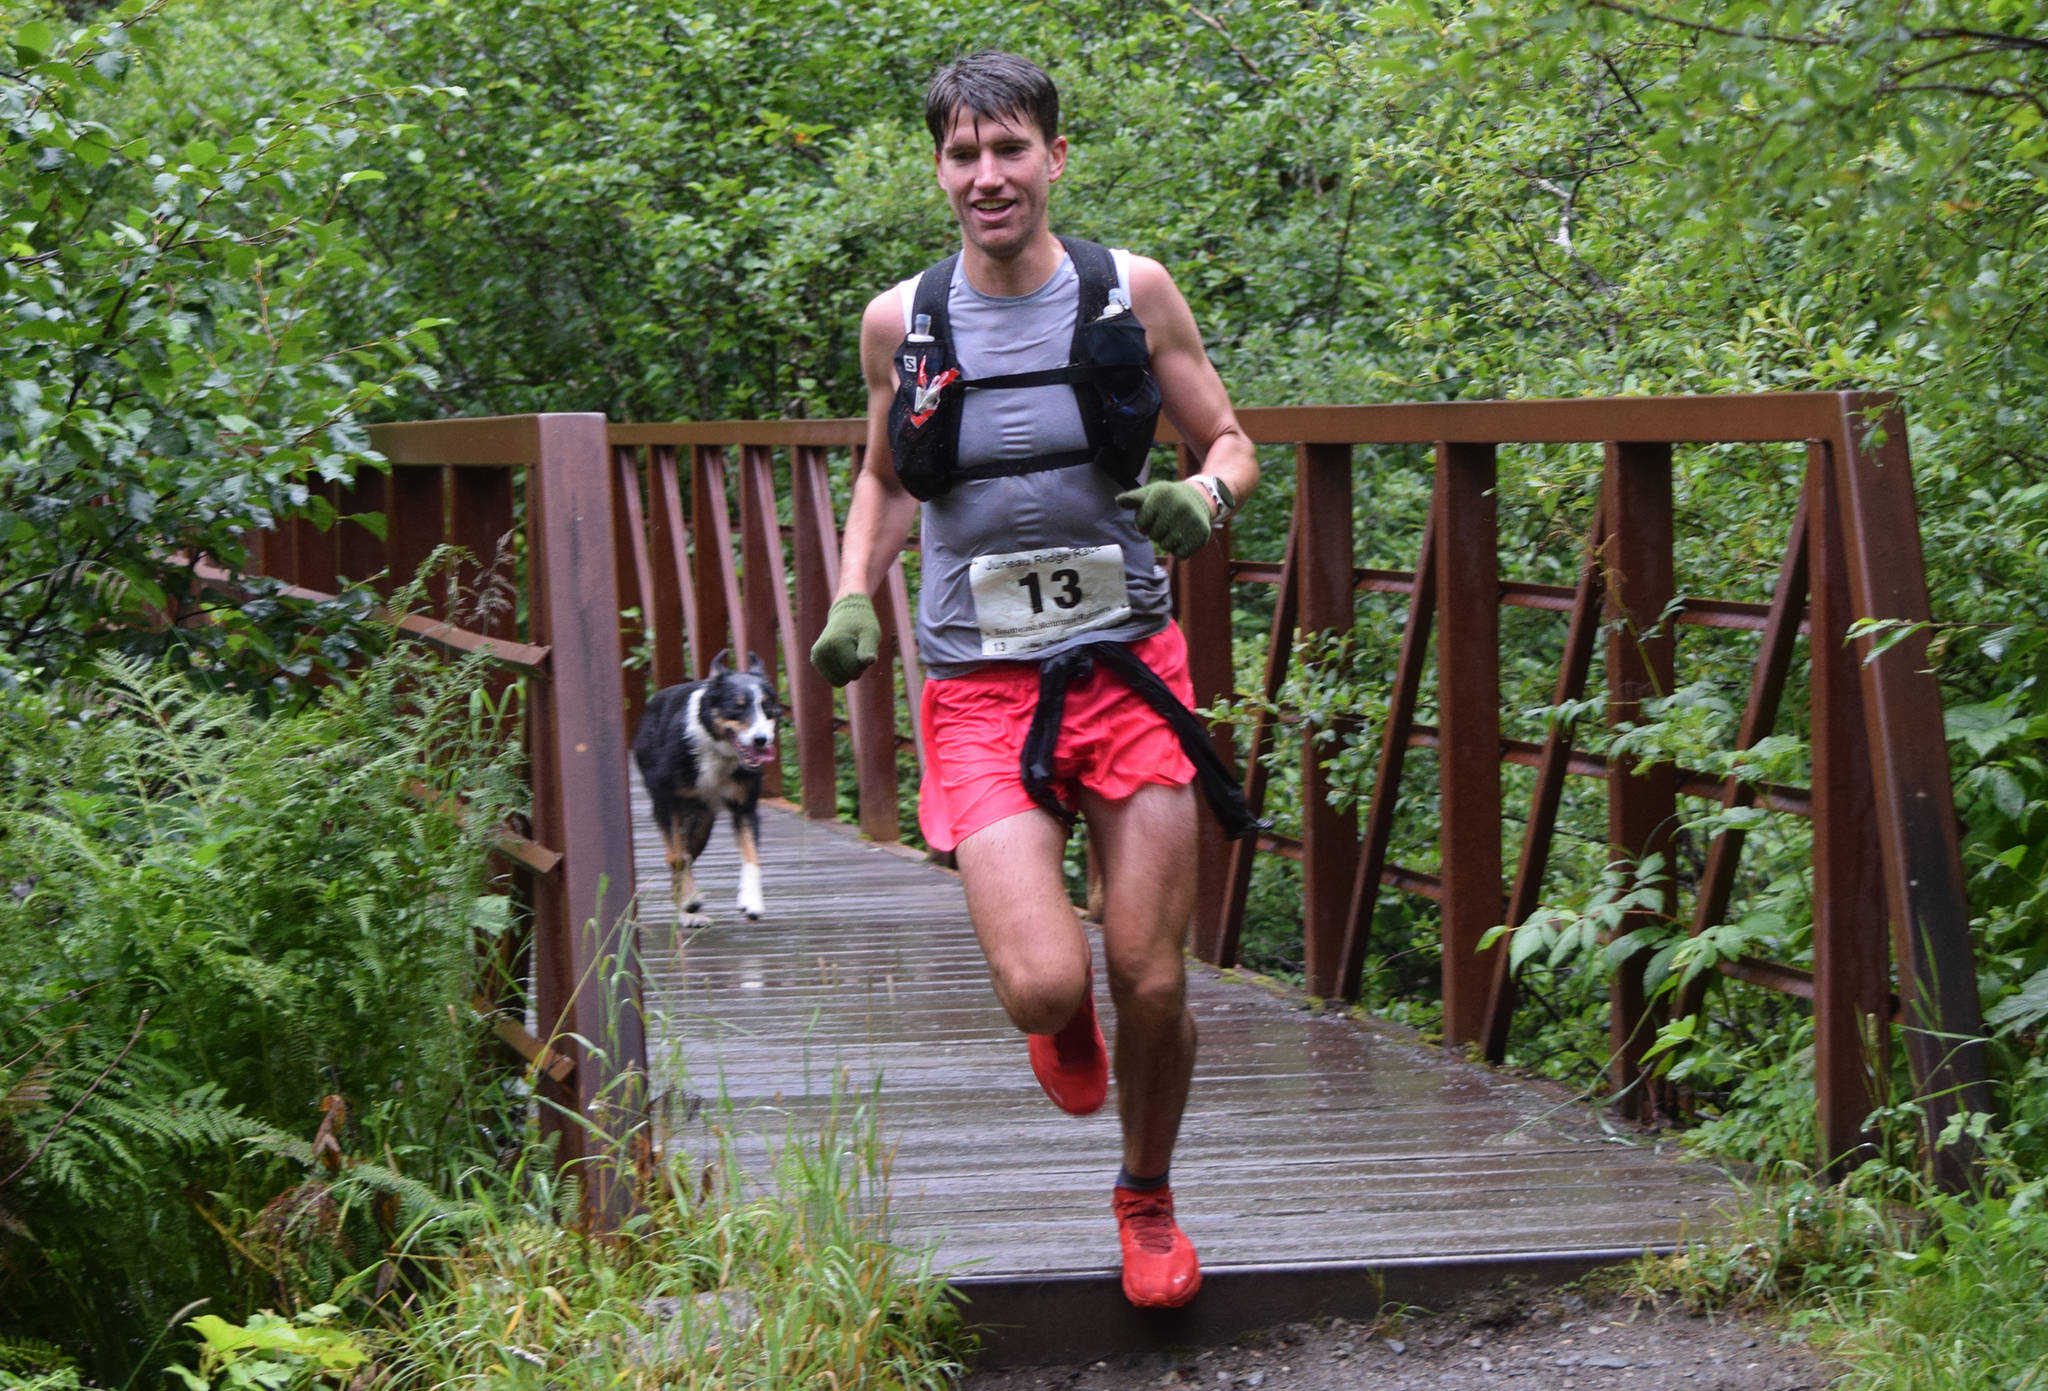 Allan Spangler runs across Gold Creek on Perseverance Trail while competing in the Juneau Ridge Race at Cope Park on Saturday, July 20, 2019. Over 60 runners participated in the 15-mile mountain running race that featured approximately 5,000 feet of elevation gain. (Nolin Ainsworth | Juneau Empire)